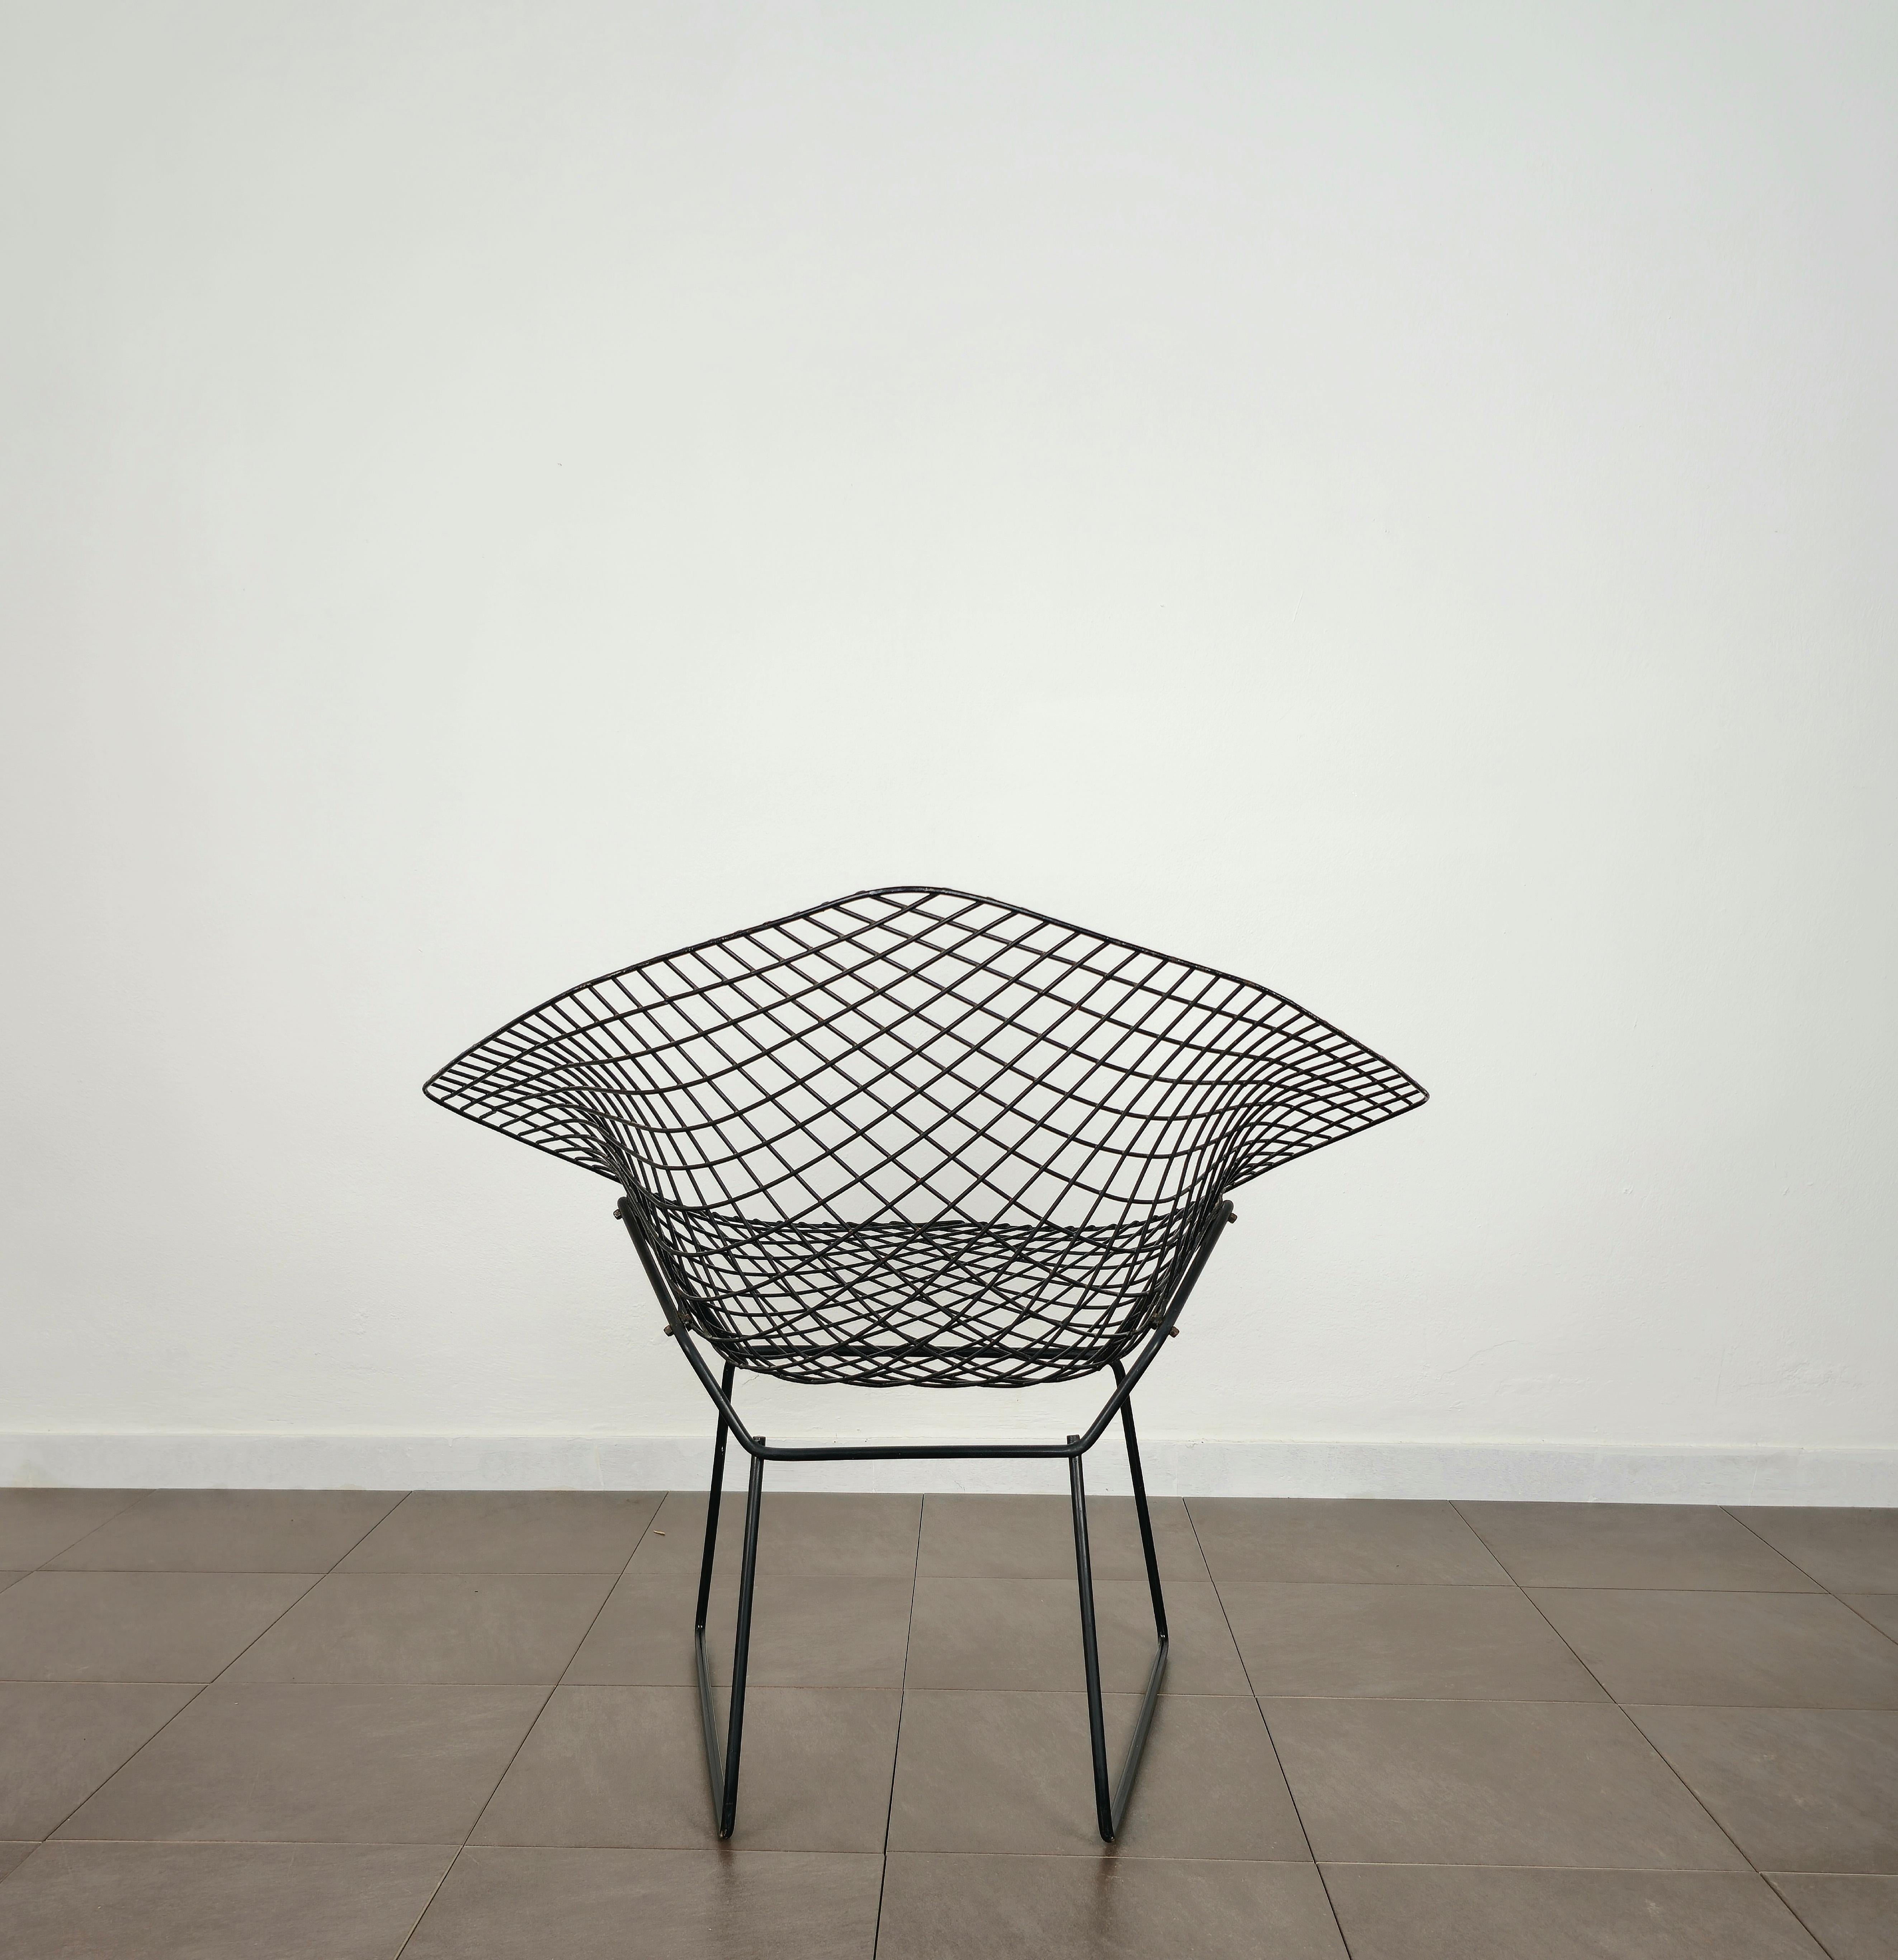 20th Century Chair Armchair Harry Bertoia for Knoll Black Metal Midcentury United States 1970 For Sale